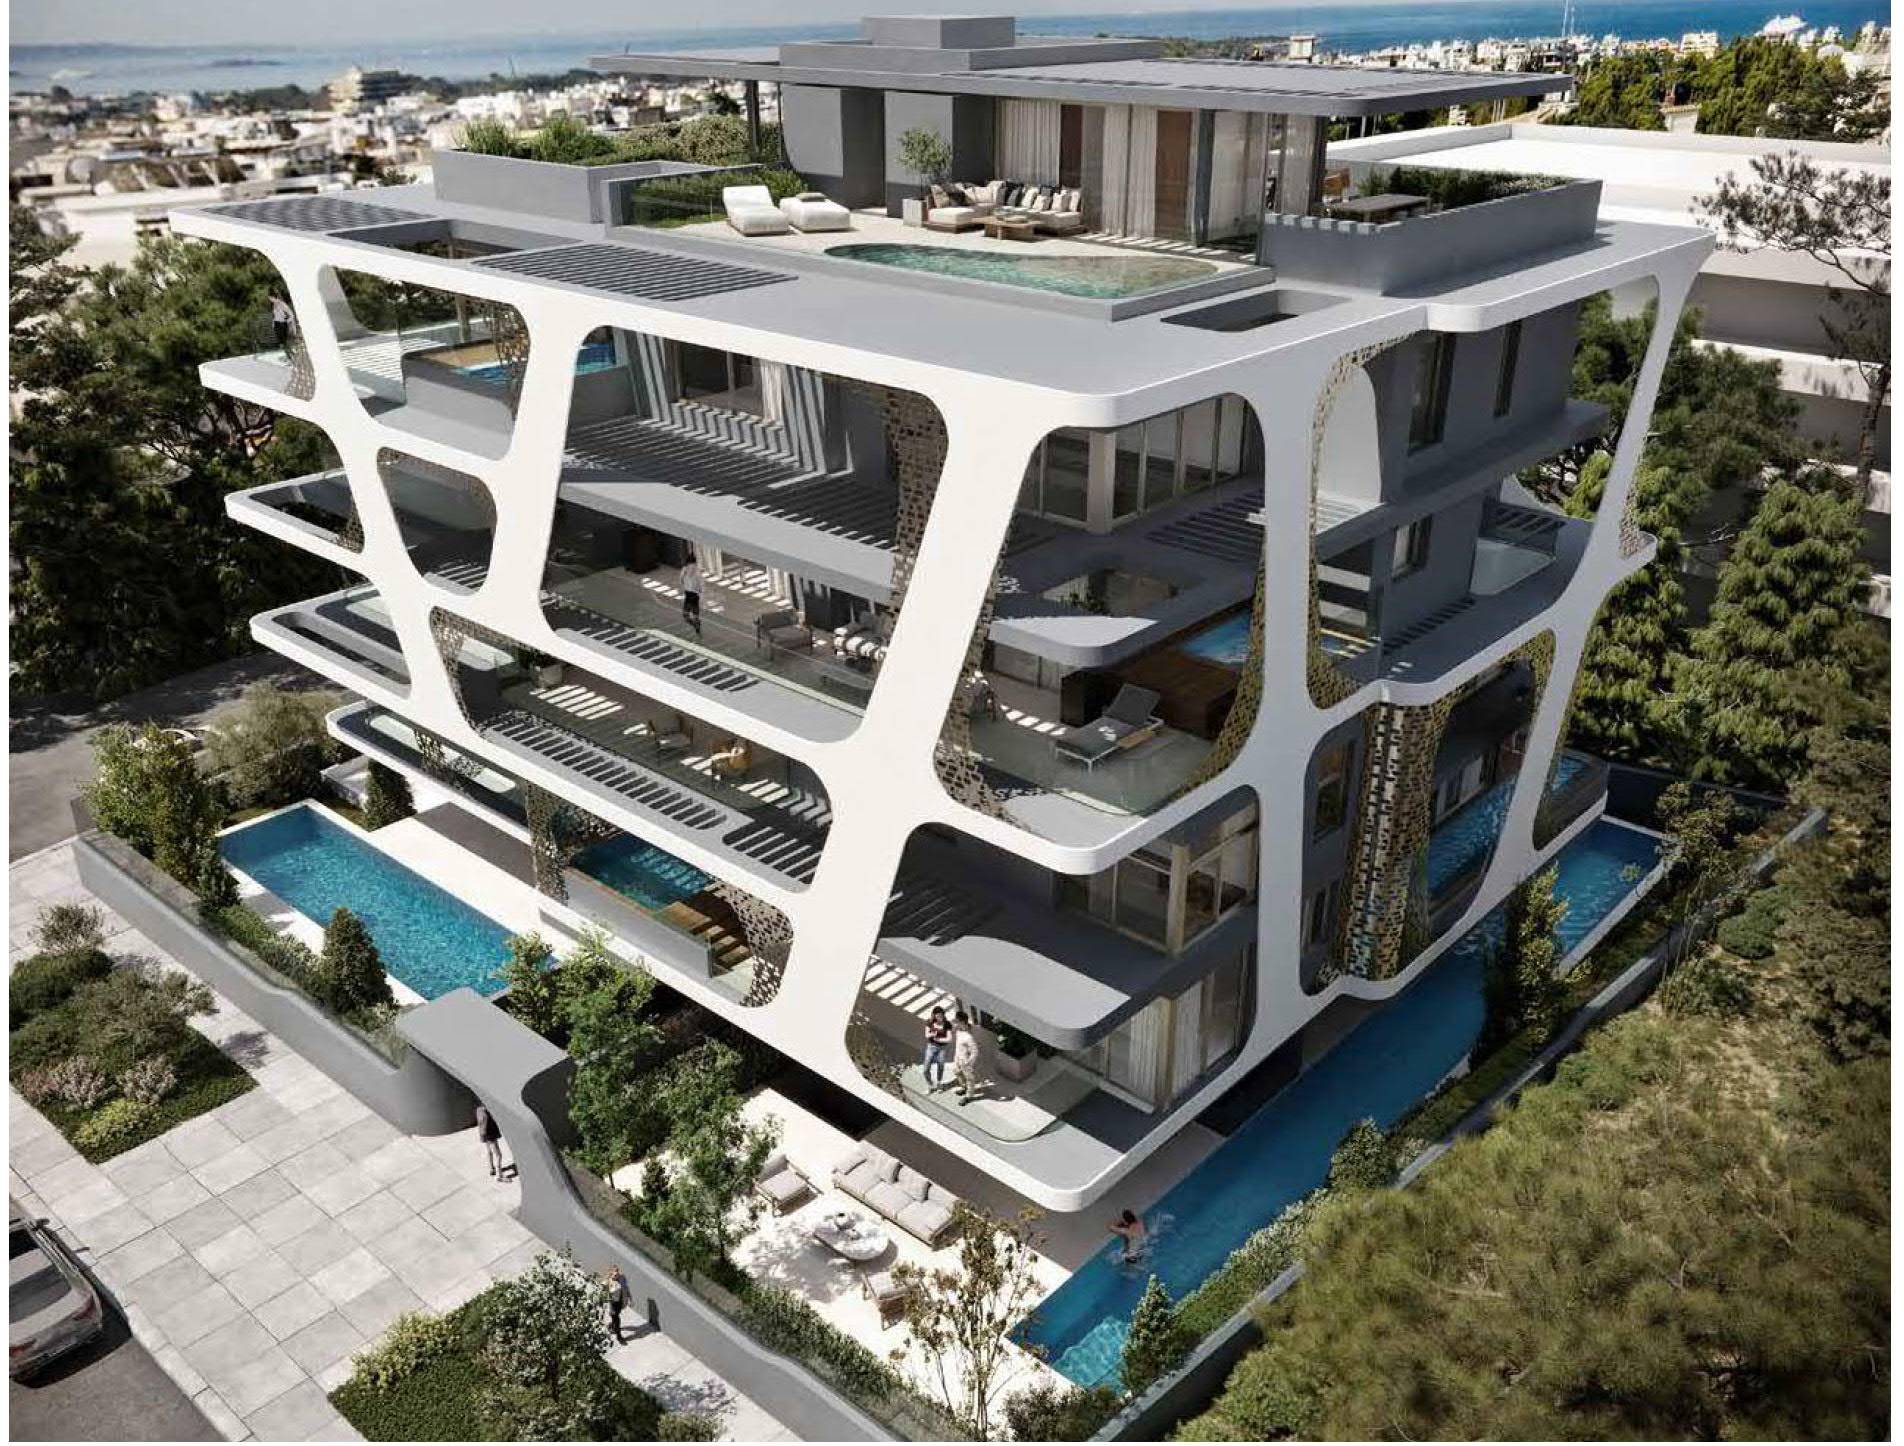 Breathtaking 230sqm Duplex, Ground Floor & Basement, in upscale cosmopolitan seaside suburb of Glyfada, with swimming pool and private garden